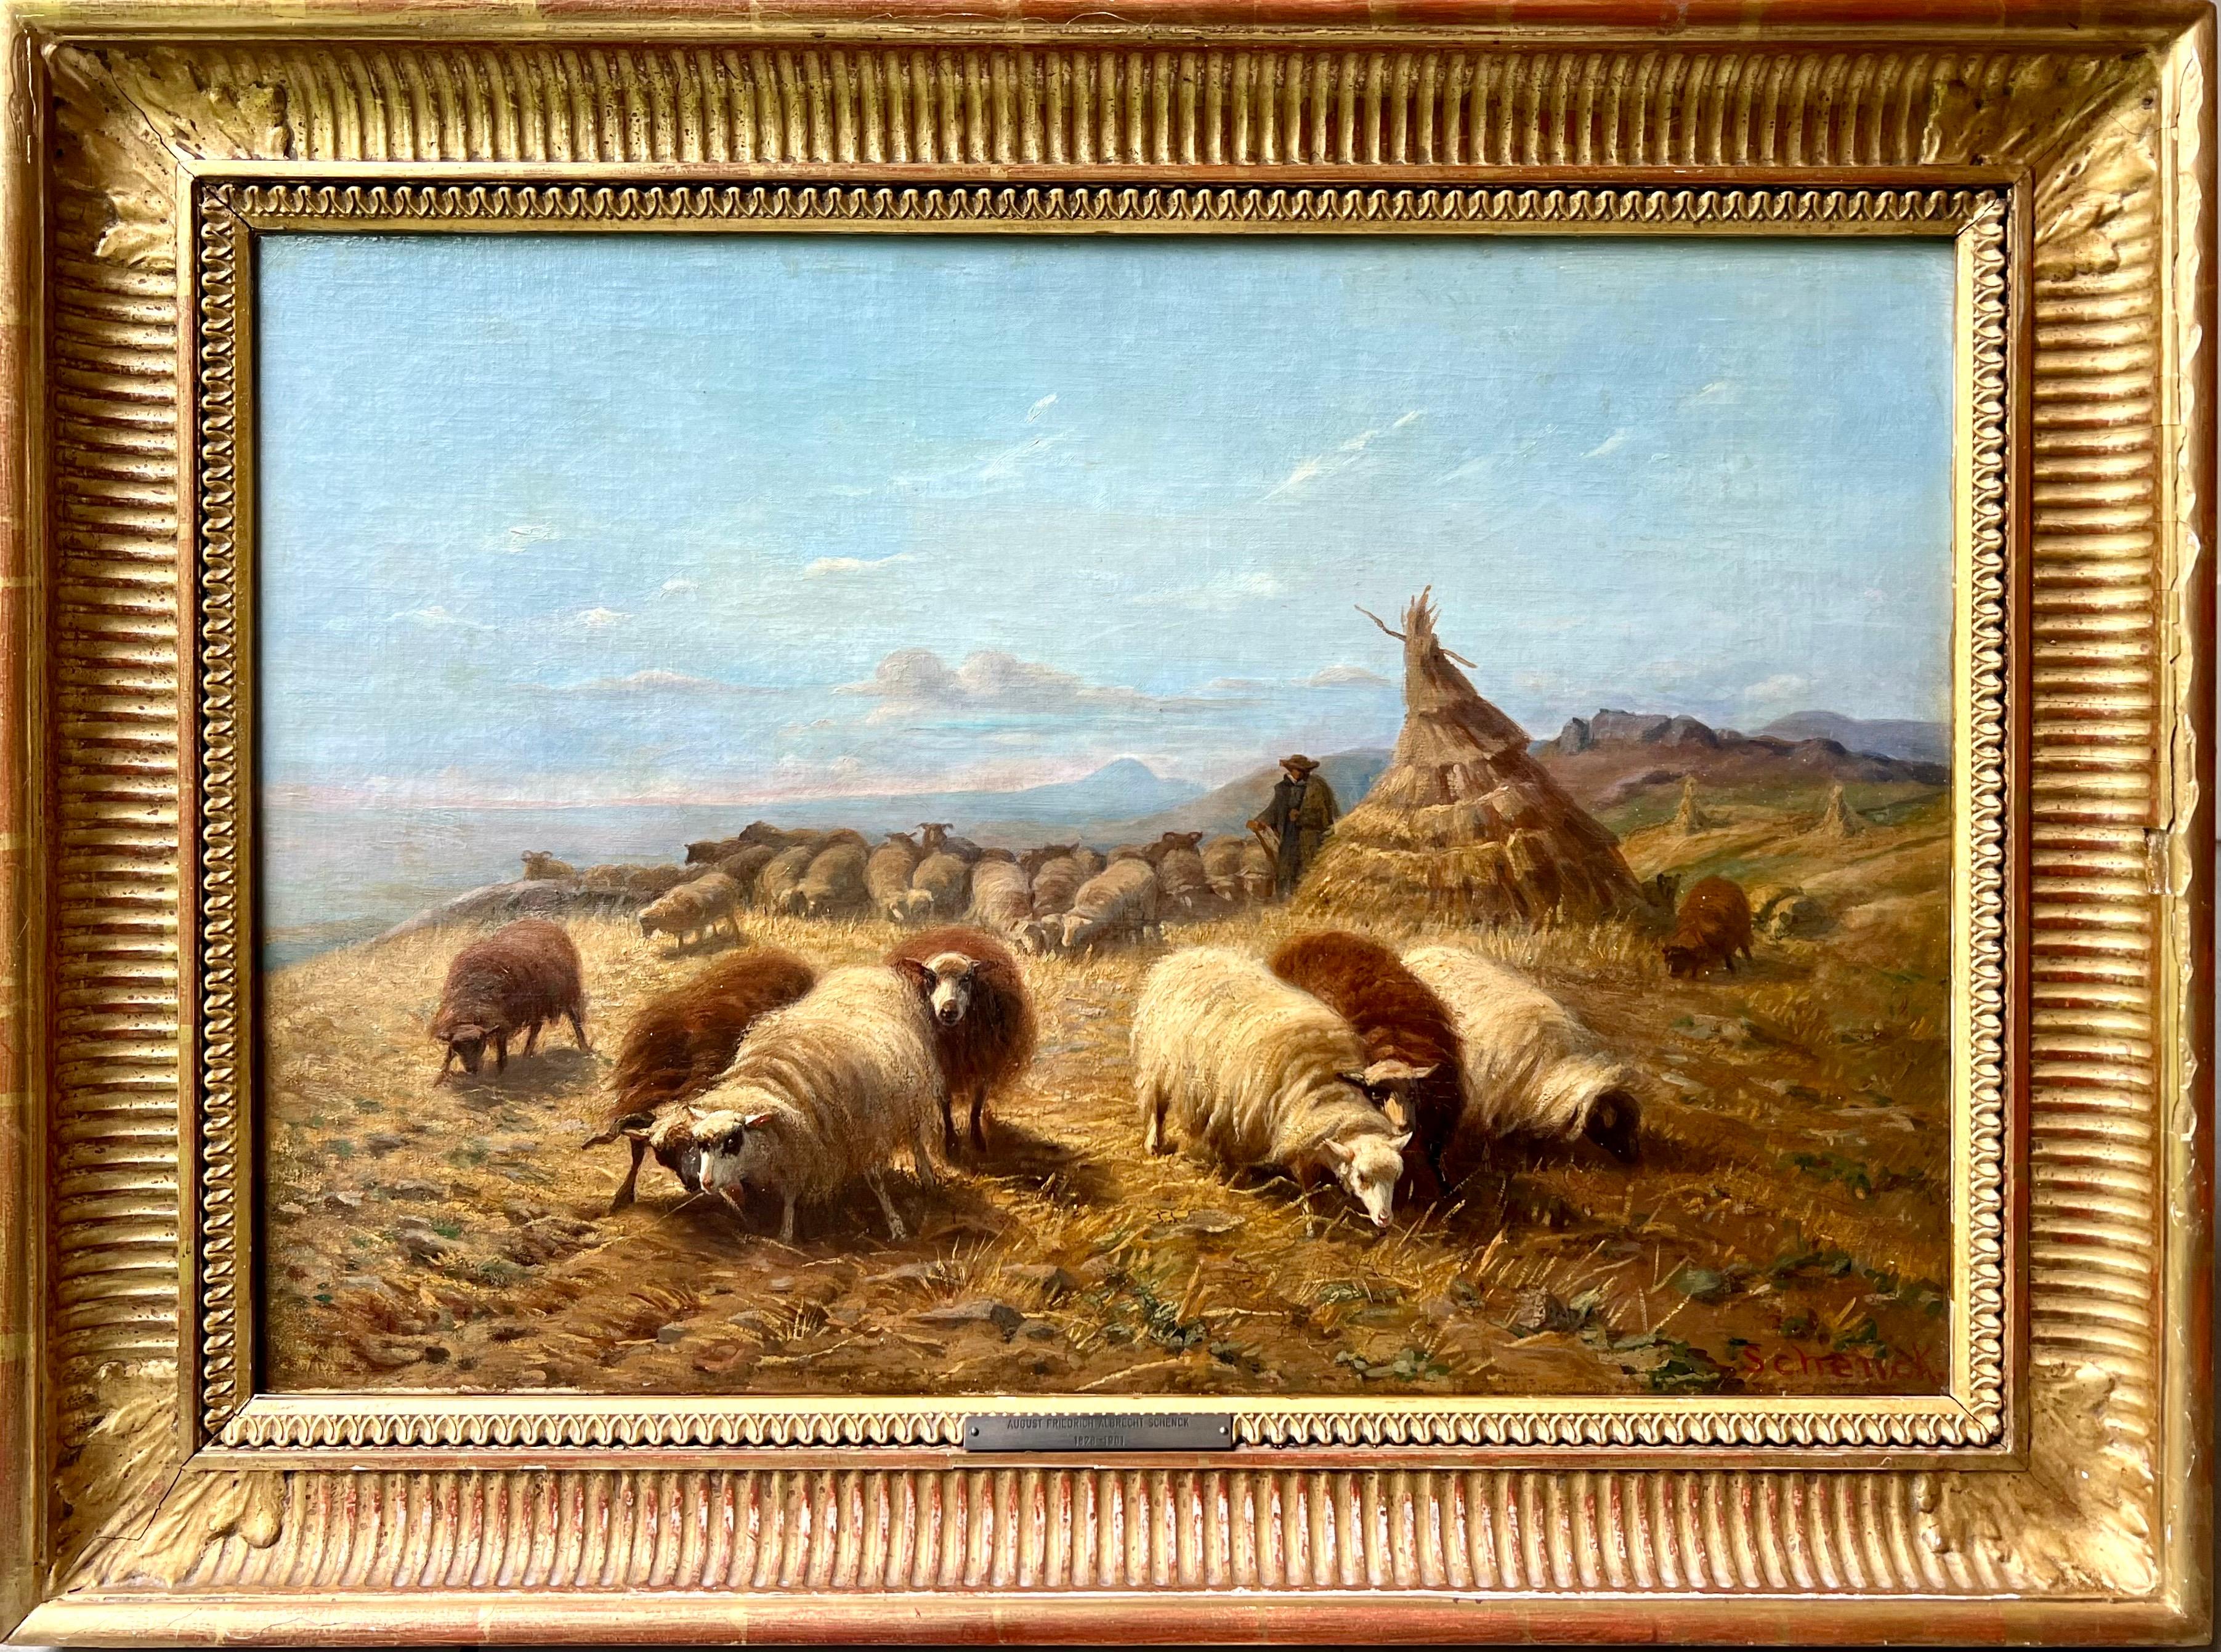 19th century painting Shepherd in a landscape with his sheep - Rosa Bonheur